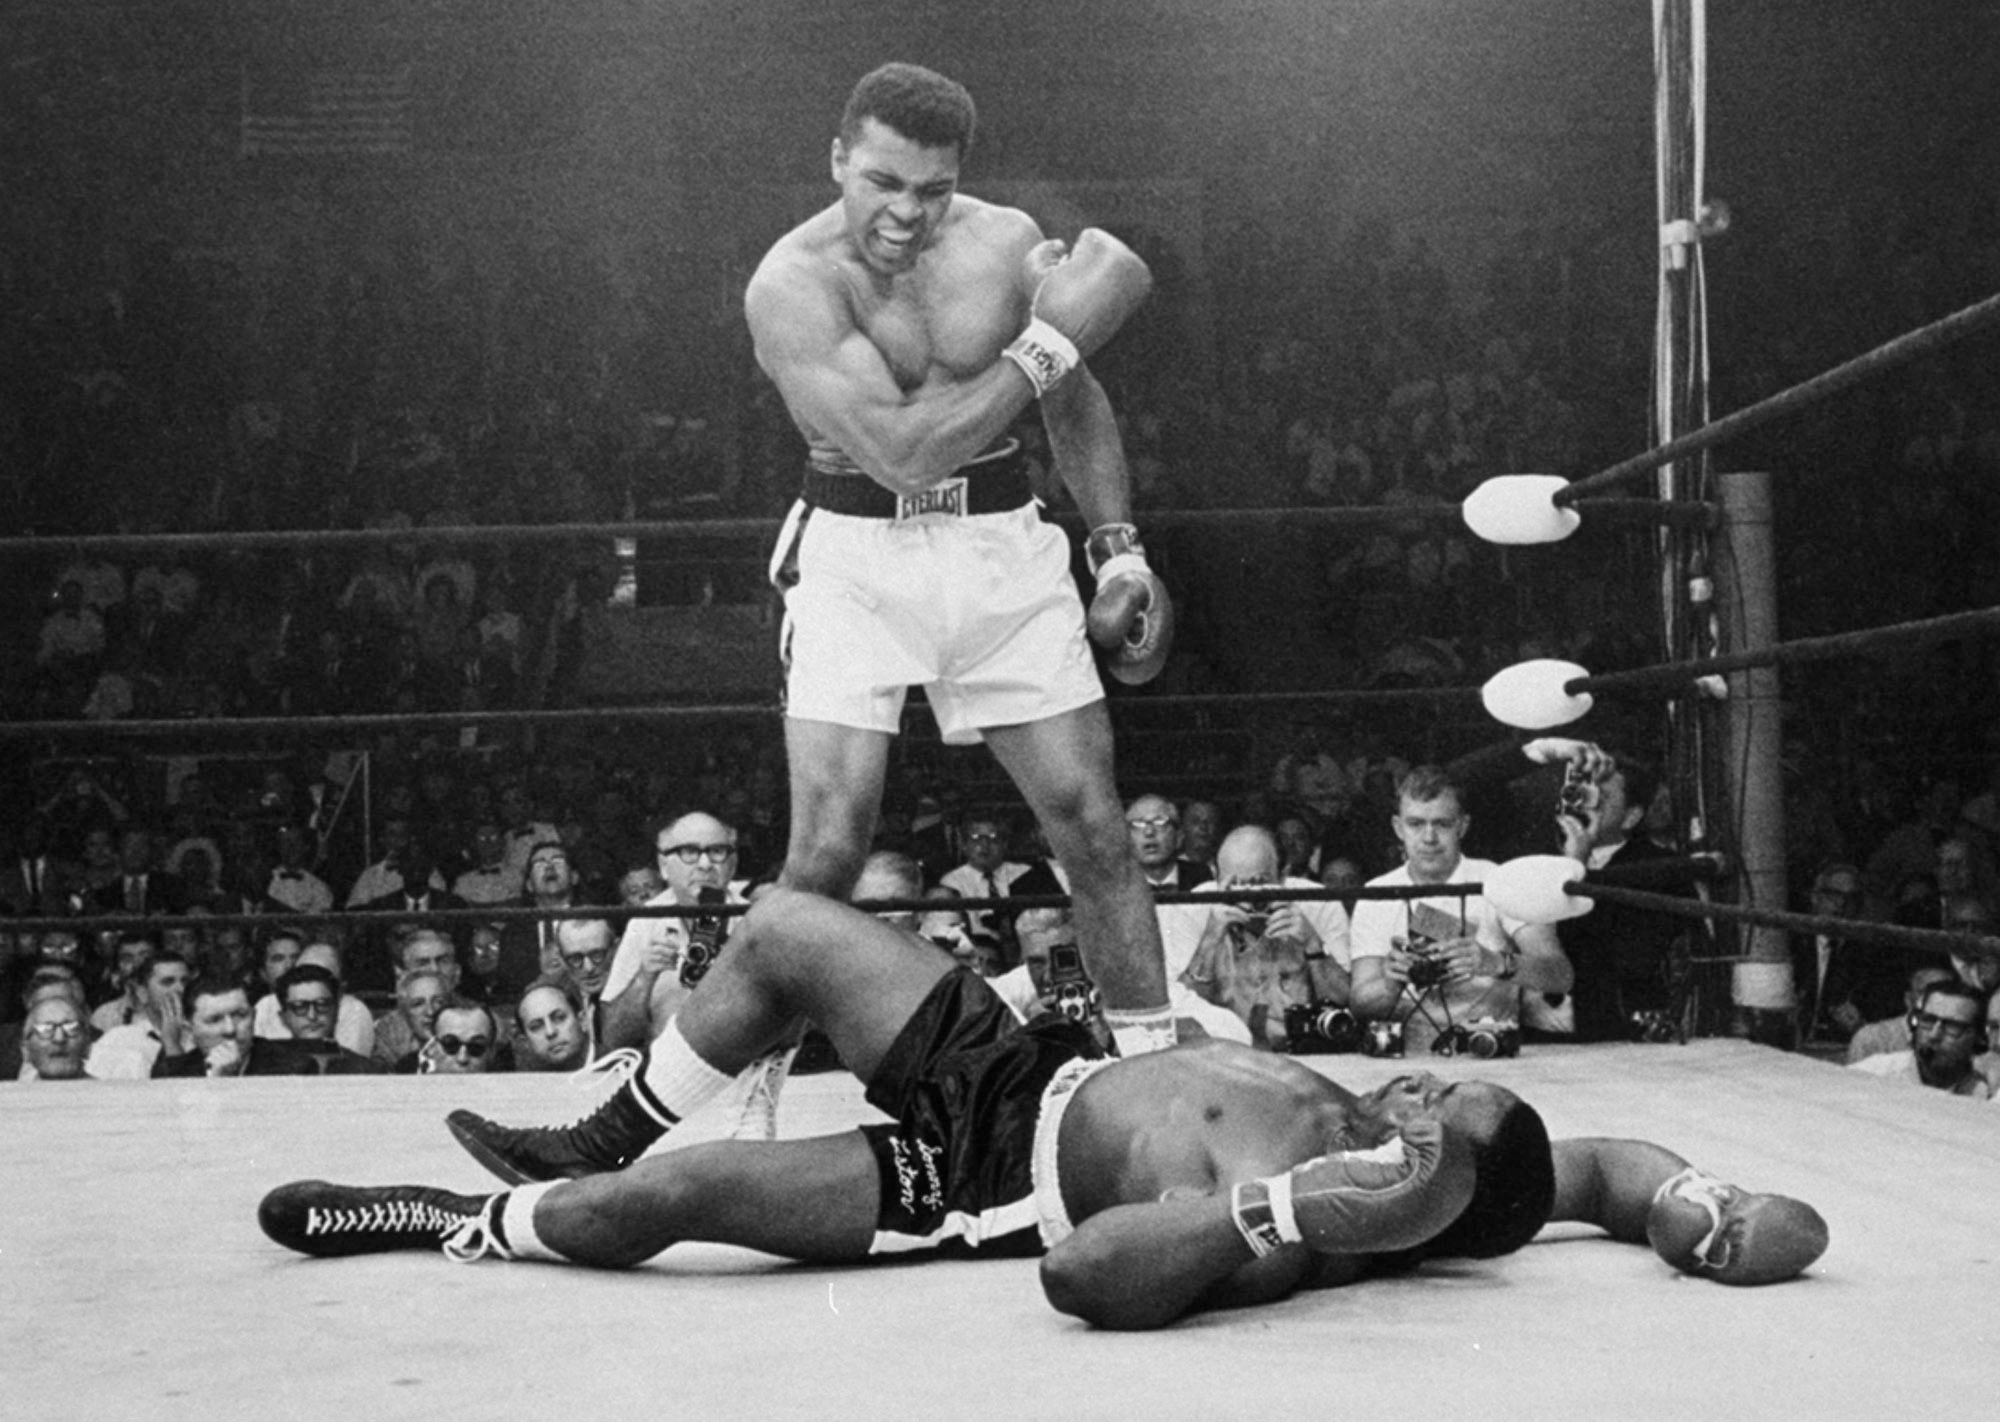 In this May 25, 1965, photo, heavyweight champion Muhammad Ali, then known as Cassius Clay, stands over challenger Sonny Liston, shouting and gesturing shortly after dropping Liston with a short hard right to the jaw, in Lewiston, Maine. Ali, the magnificent heavyweight champion whose fast fists and irrepressible personality transcended sports and captivated the world, has died according to a statement released by his family Friday, June 3, 2016. He was 74.